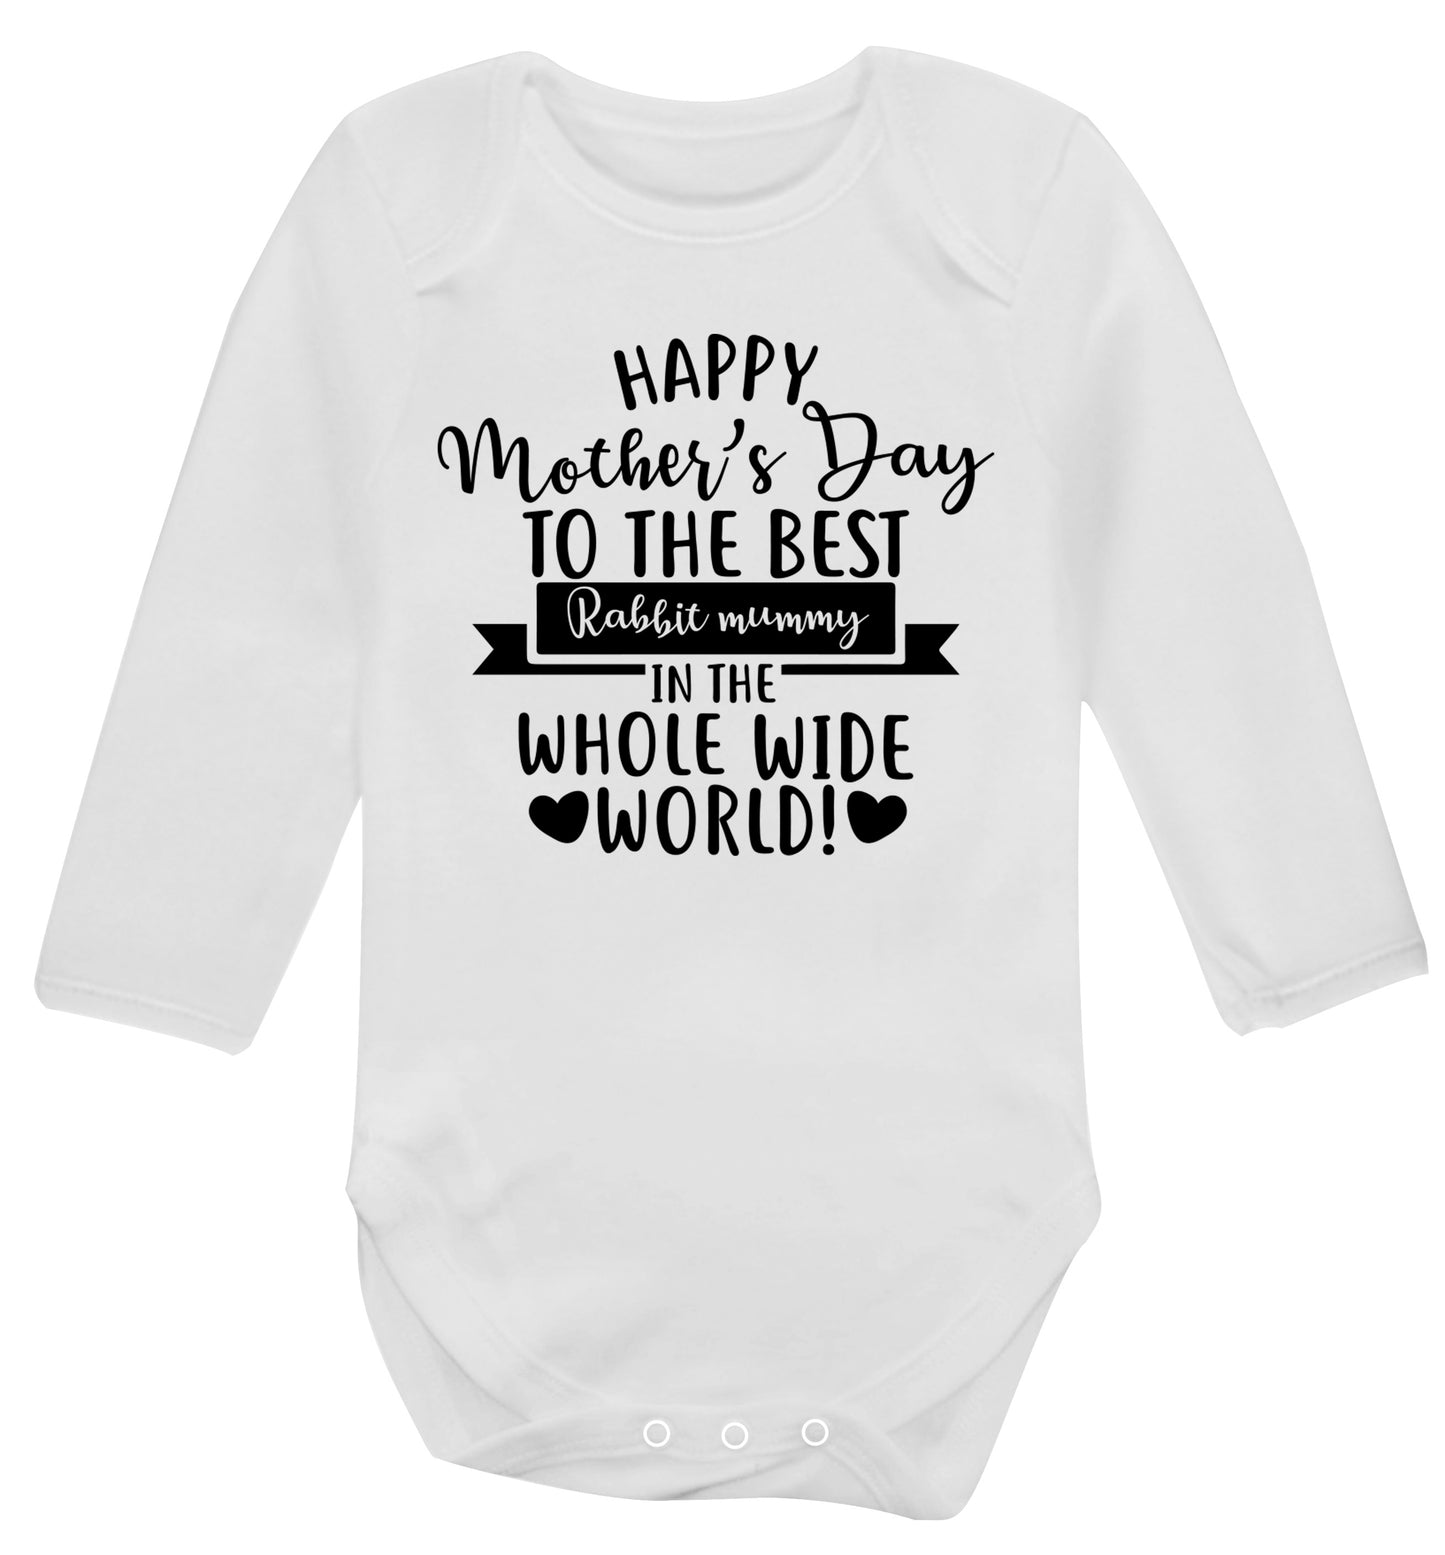 Happy mother's day to the best rabbit mummy in the world Baby Vest long sleeved white 6-12 months